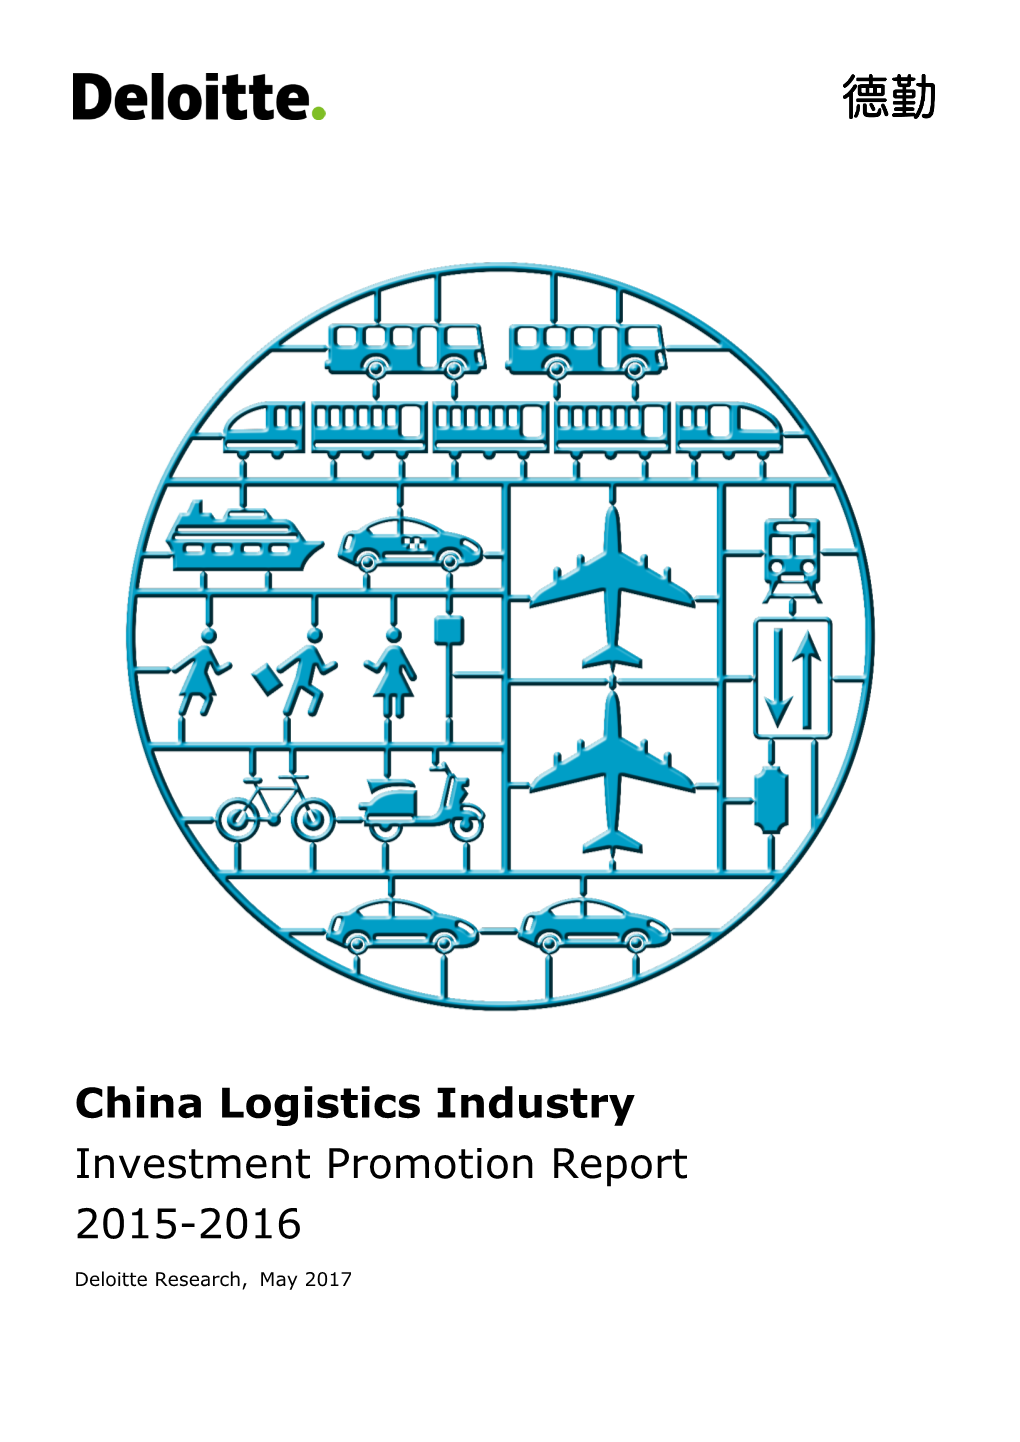 China Logistics Industry Investment Promotion Report 2015-2016